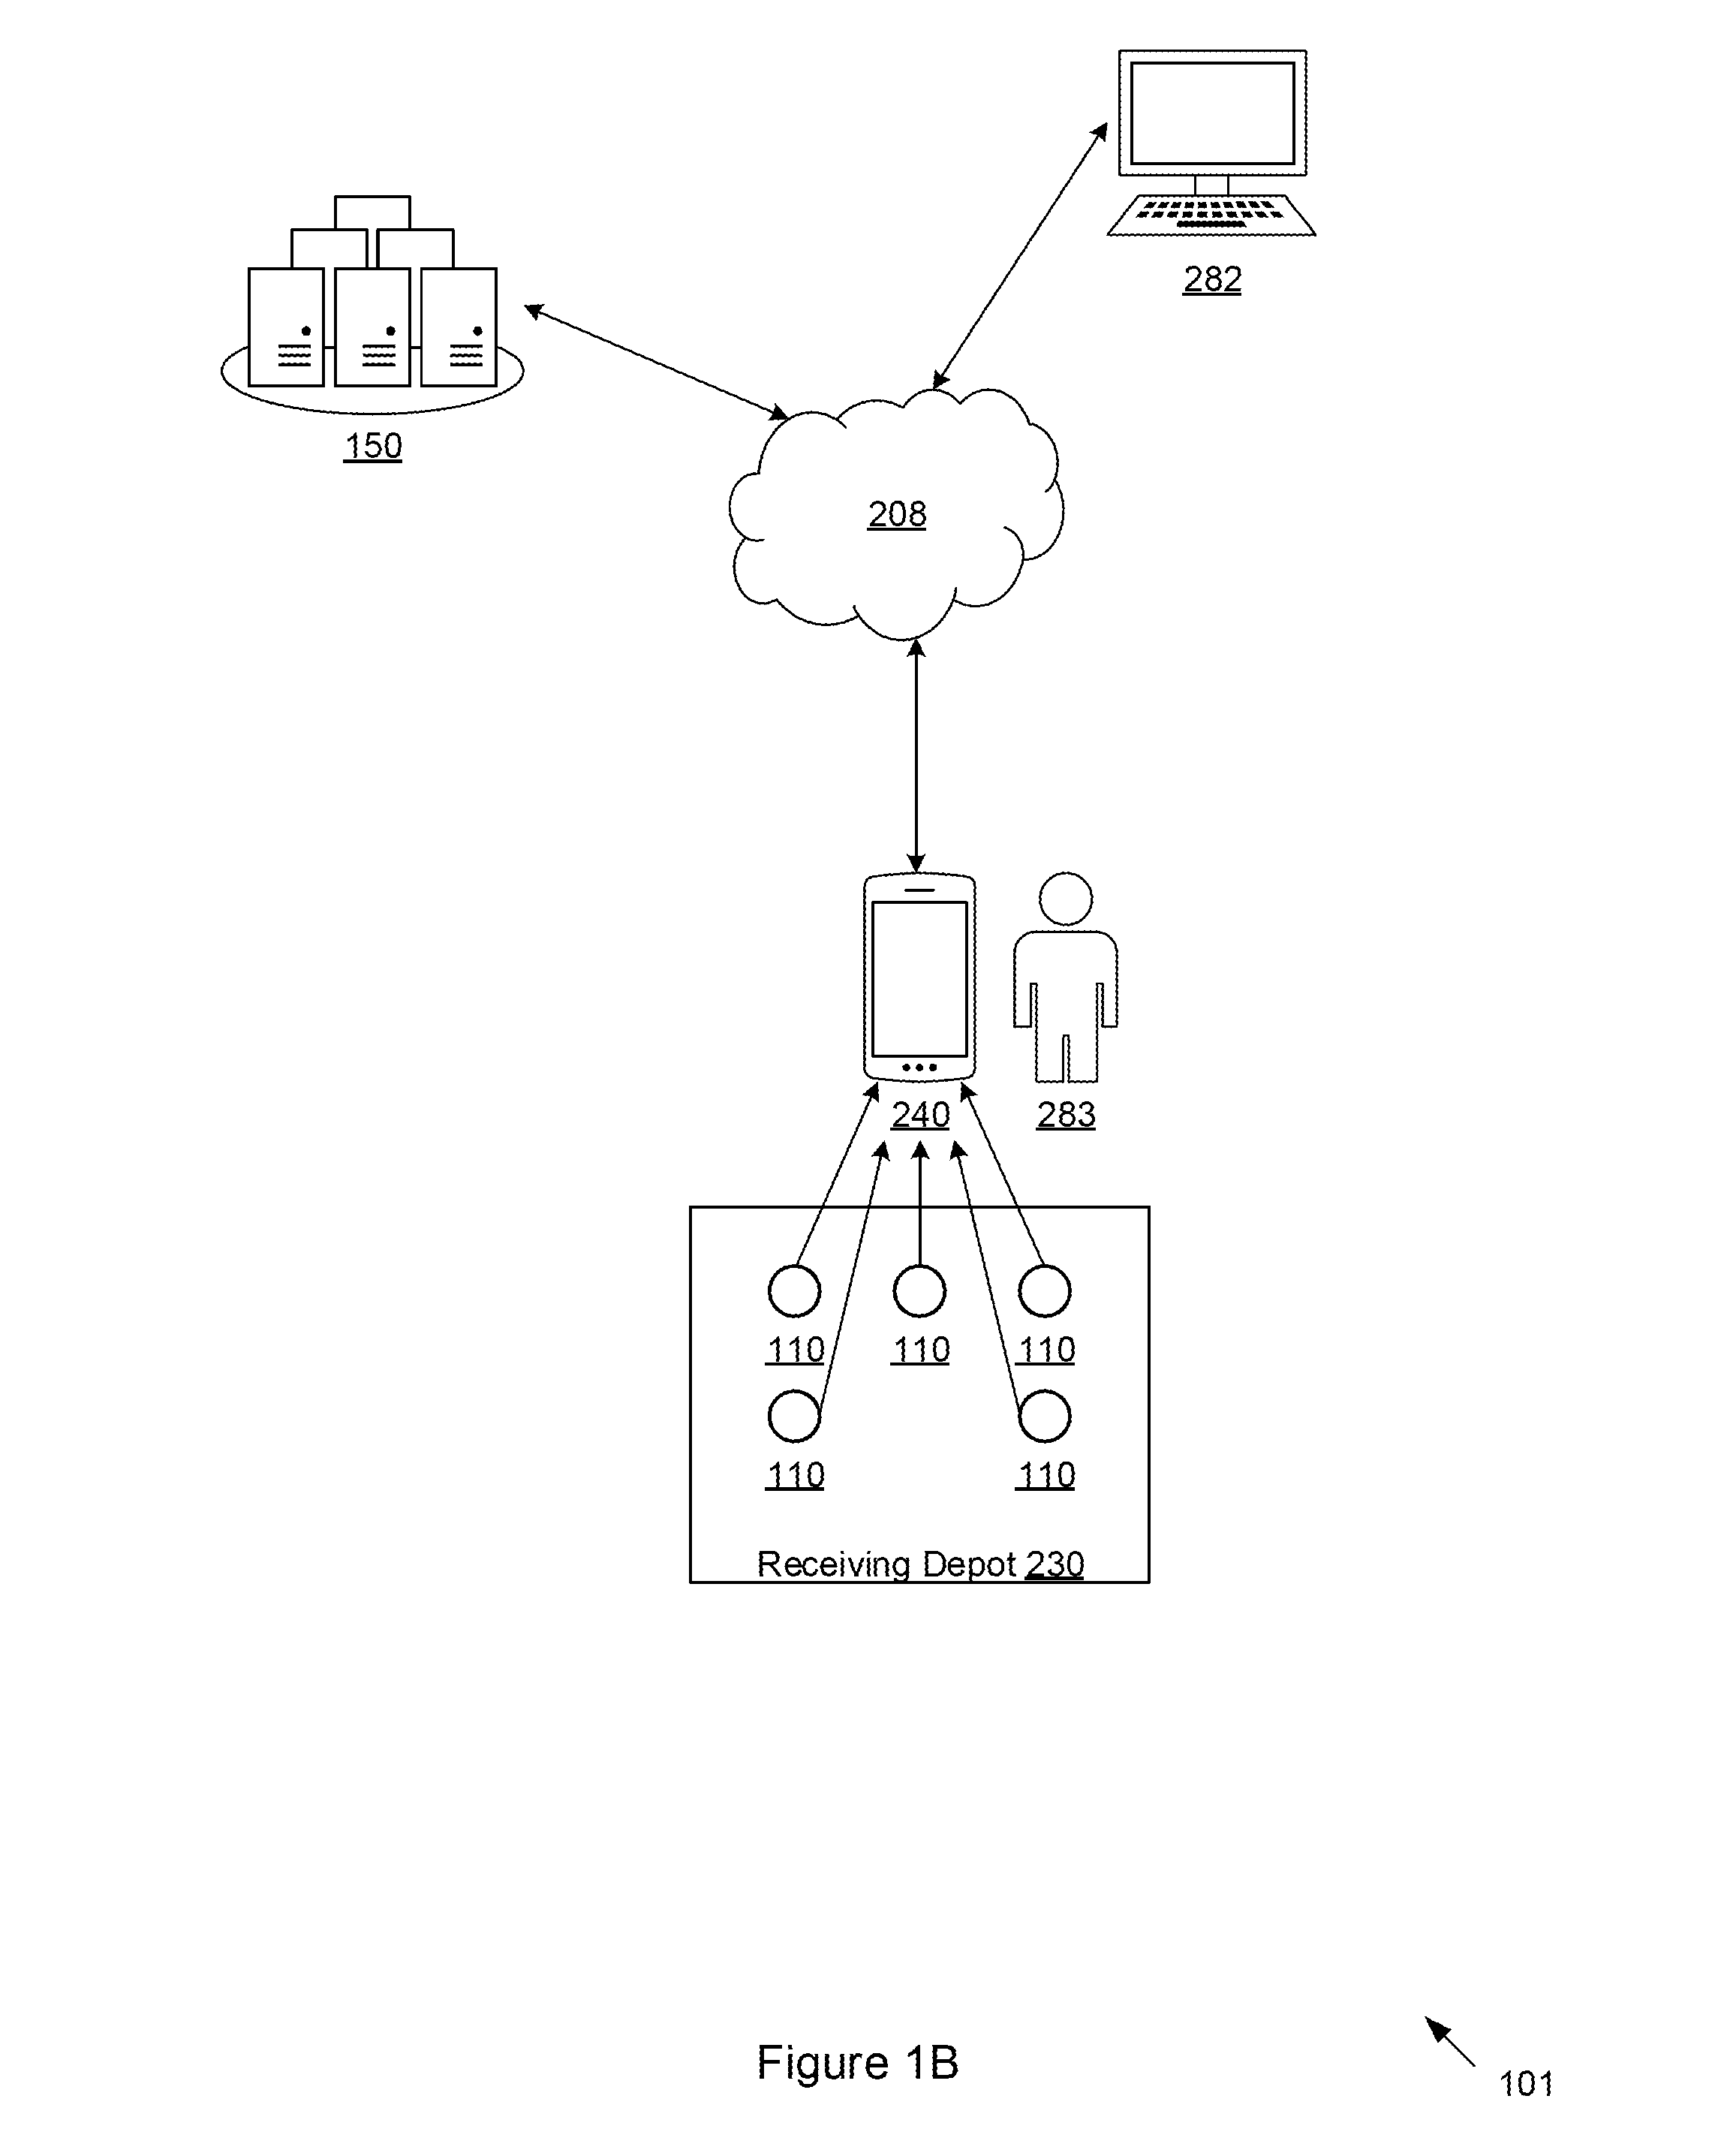 Monitoring device and systems and methods related thereto